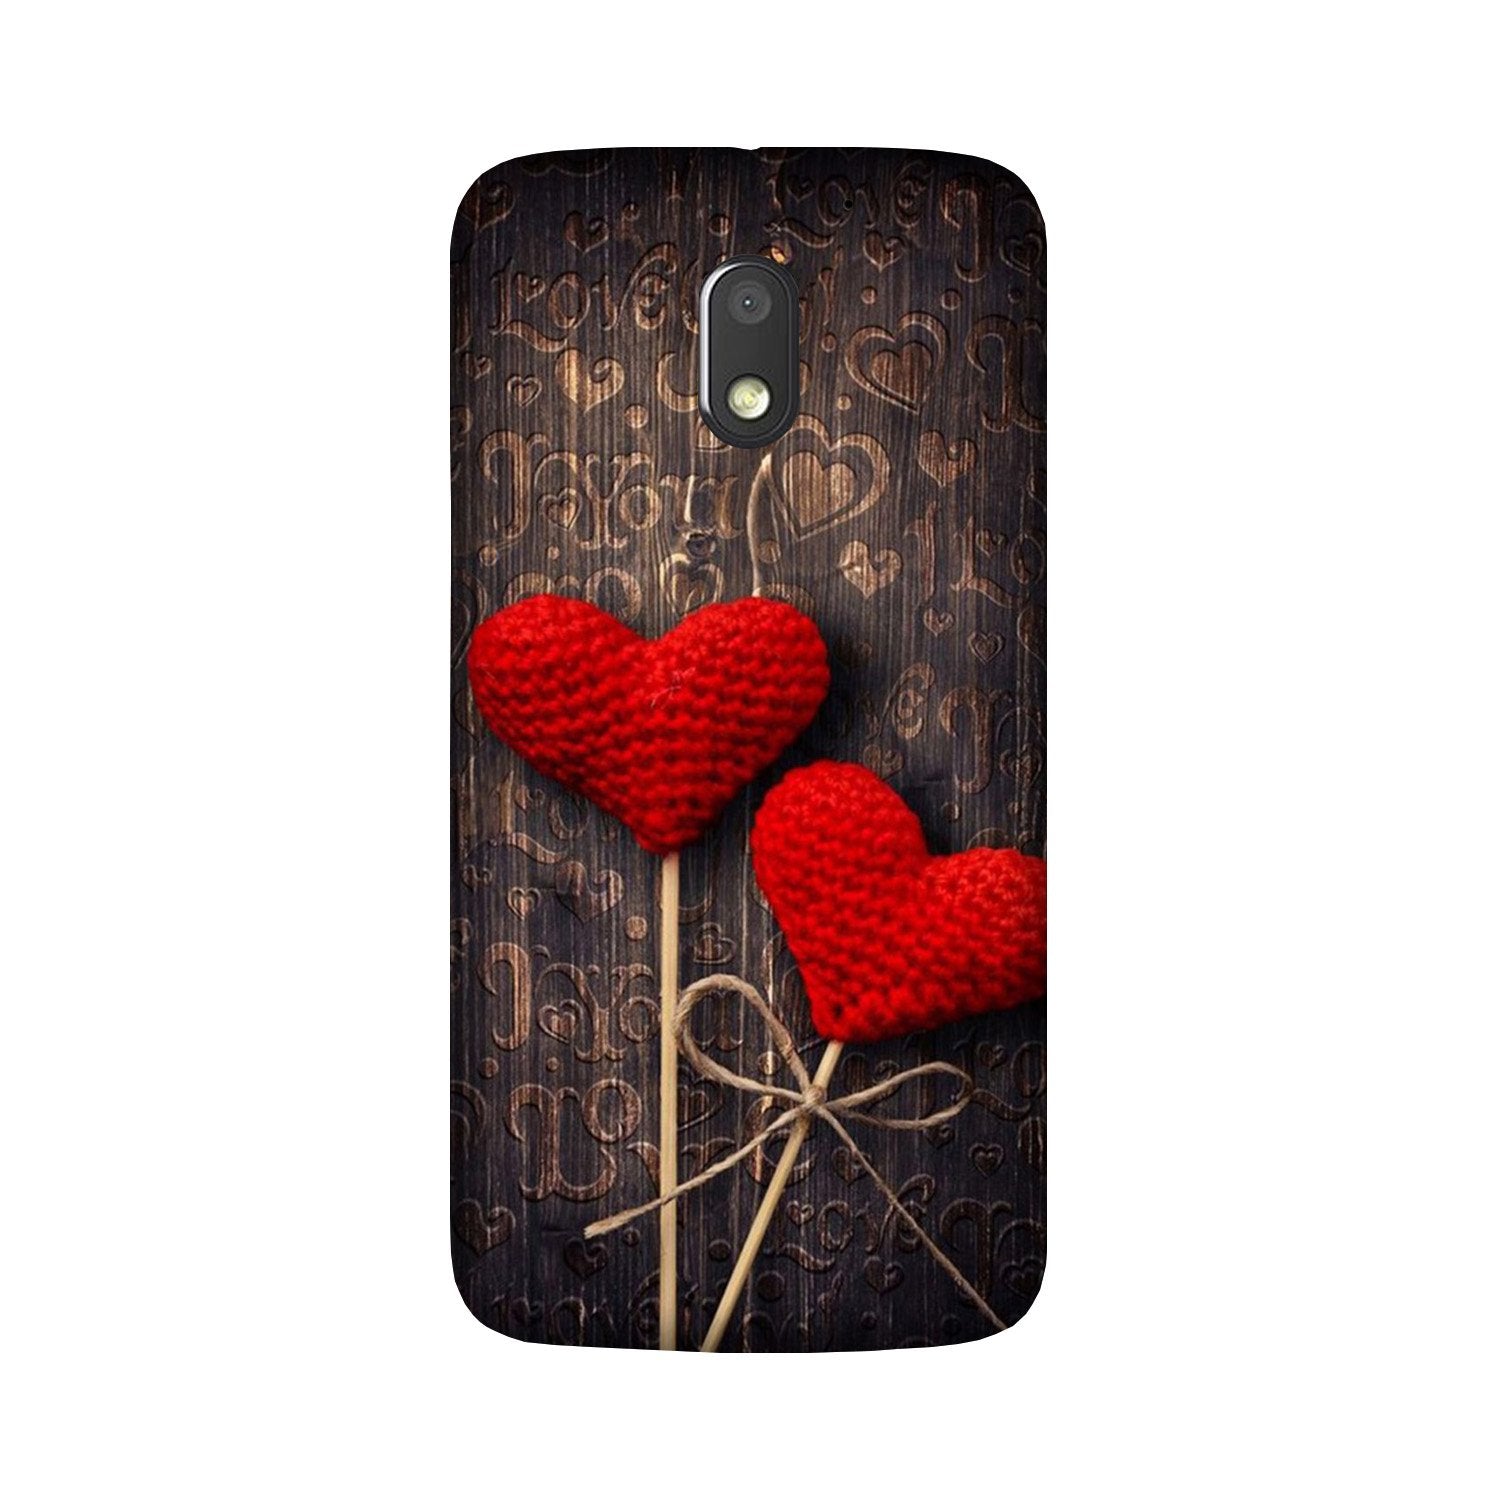 Red Hearts Case for Moto G4 Play